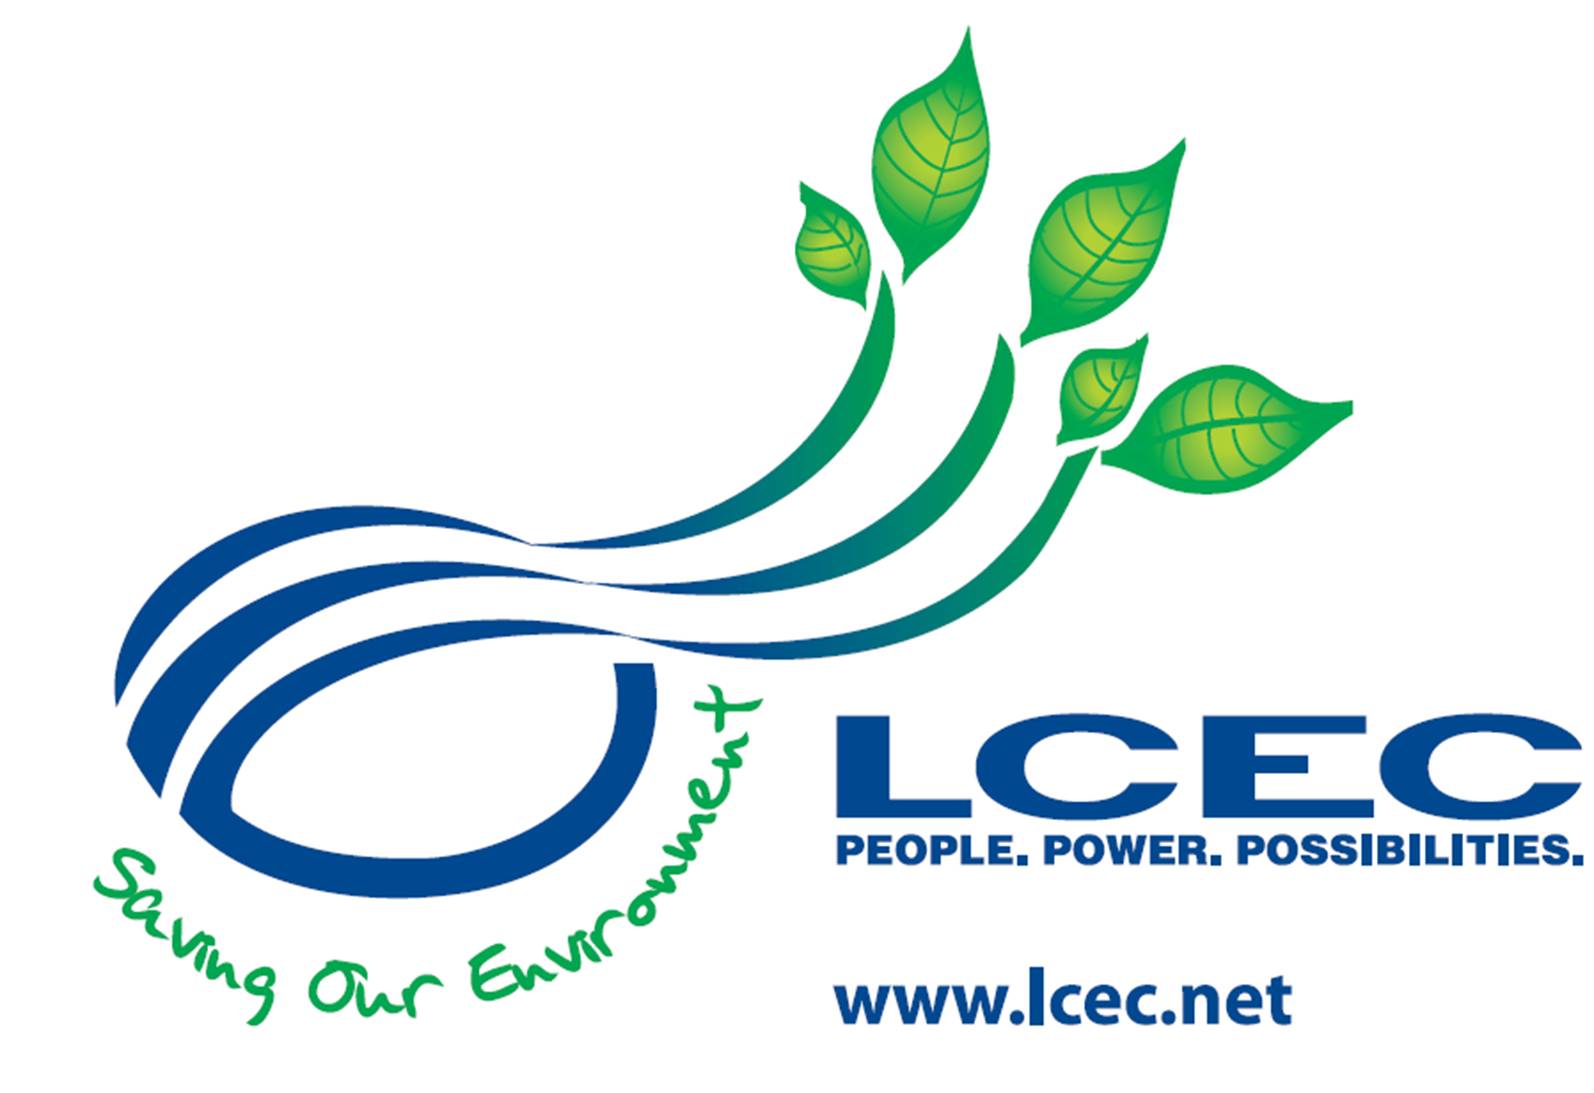 Lee County Electric Cooperative - LCEC